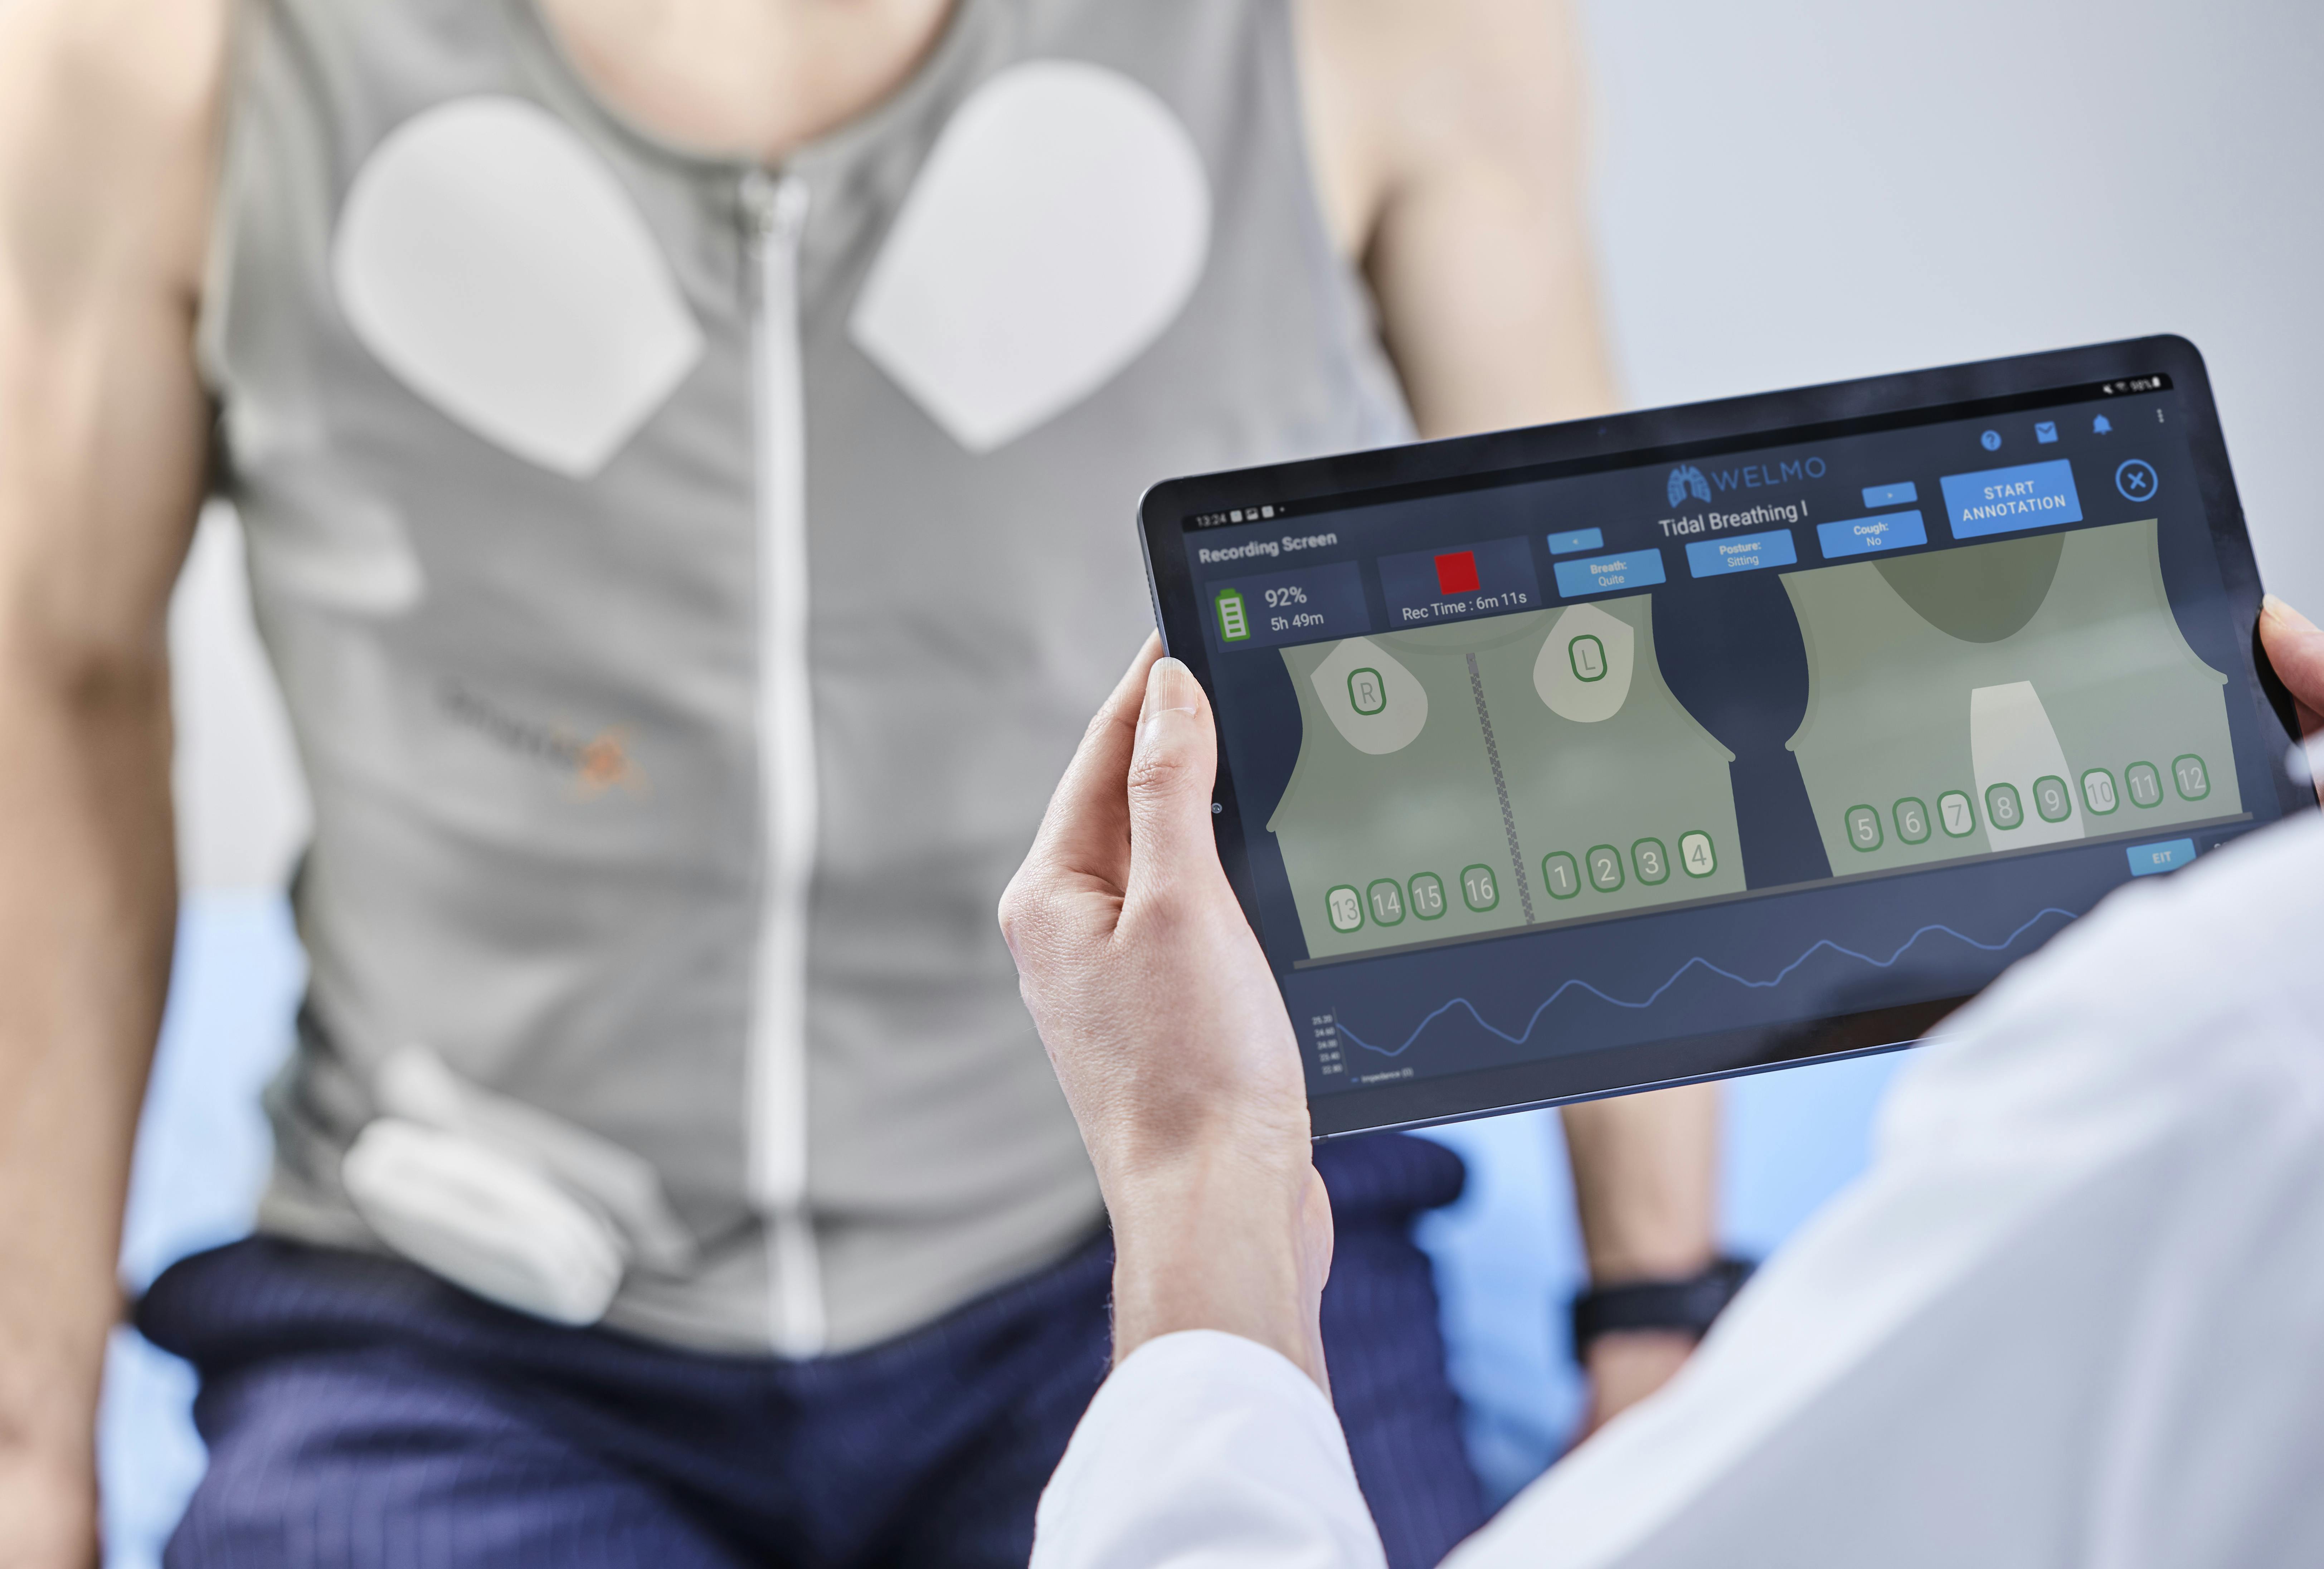 Medical wearables